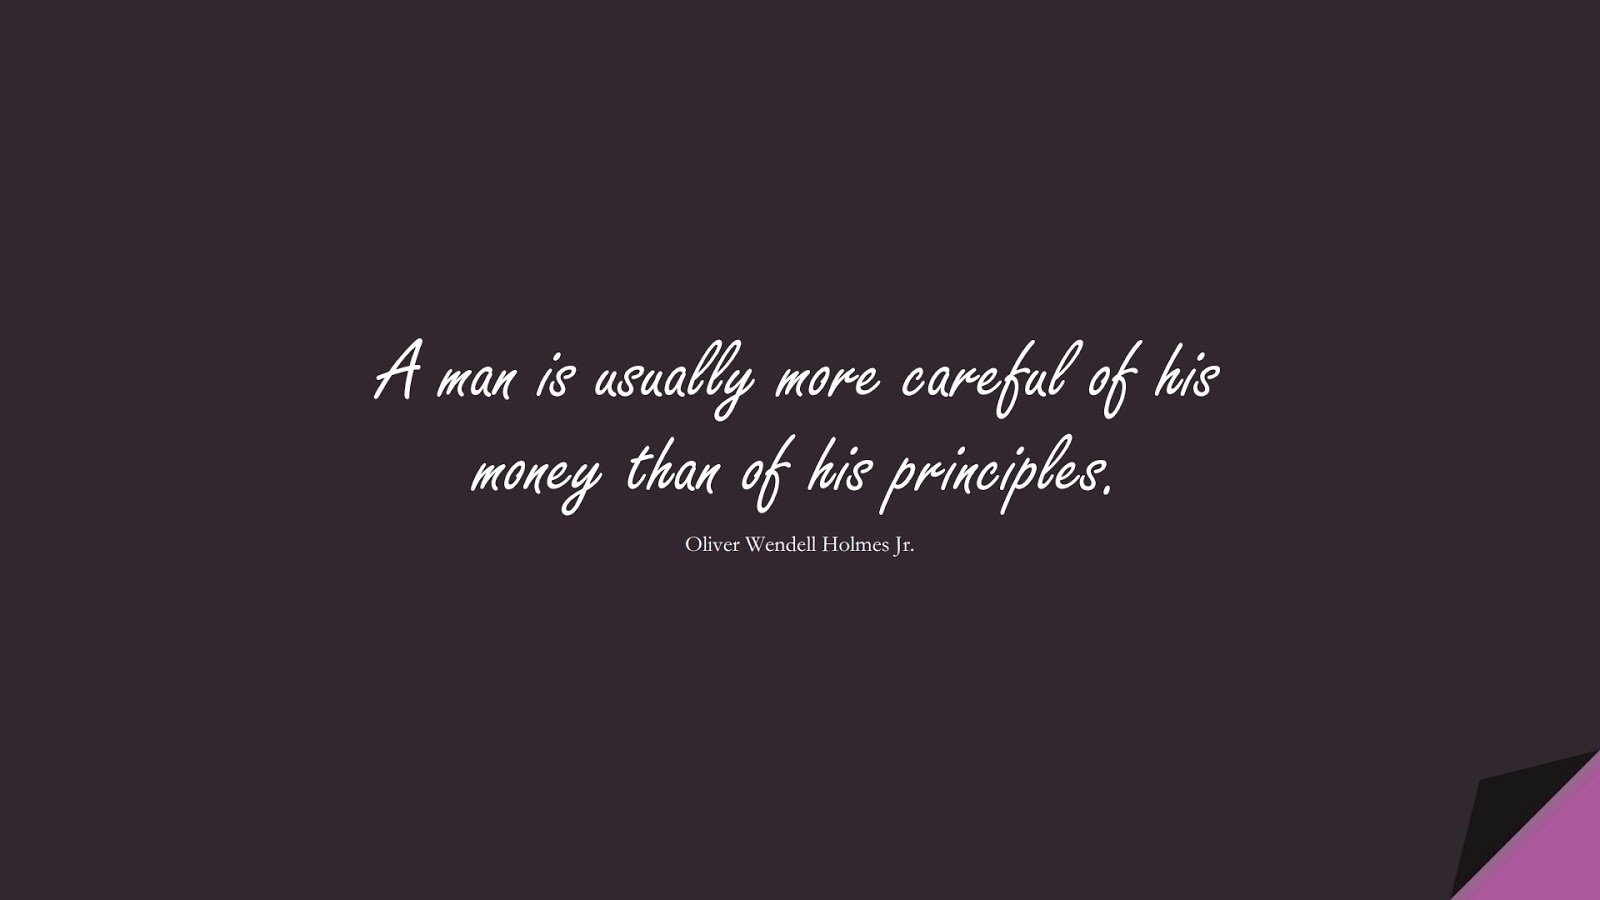 A man is usually more careful of his money than of his principles. (Oliver Wendell Holmes Jr.);  #MoneyQuotes